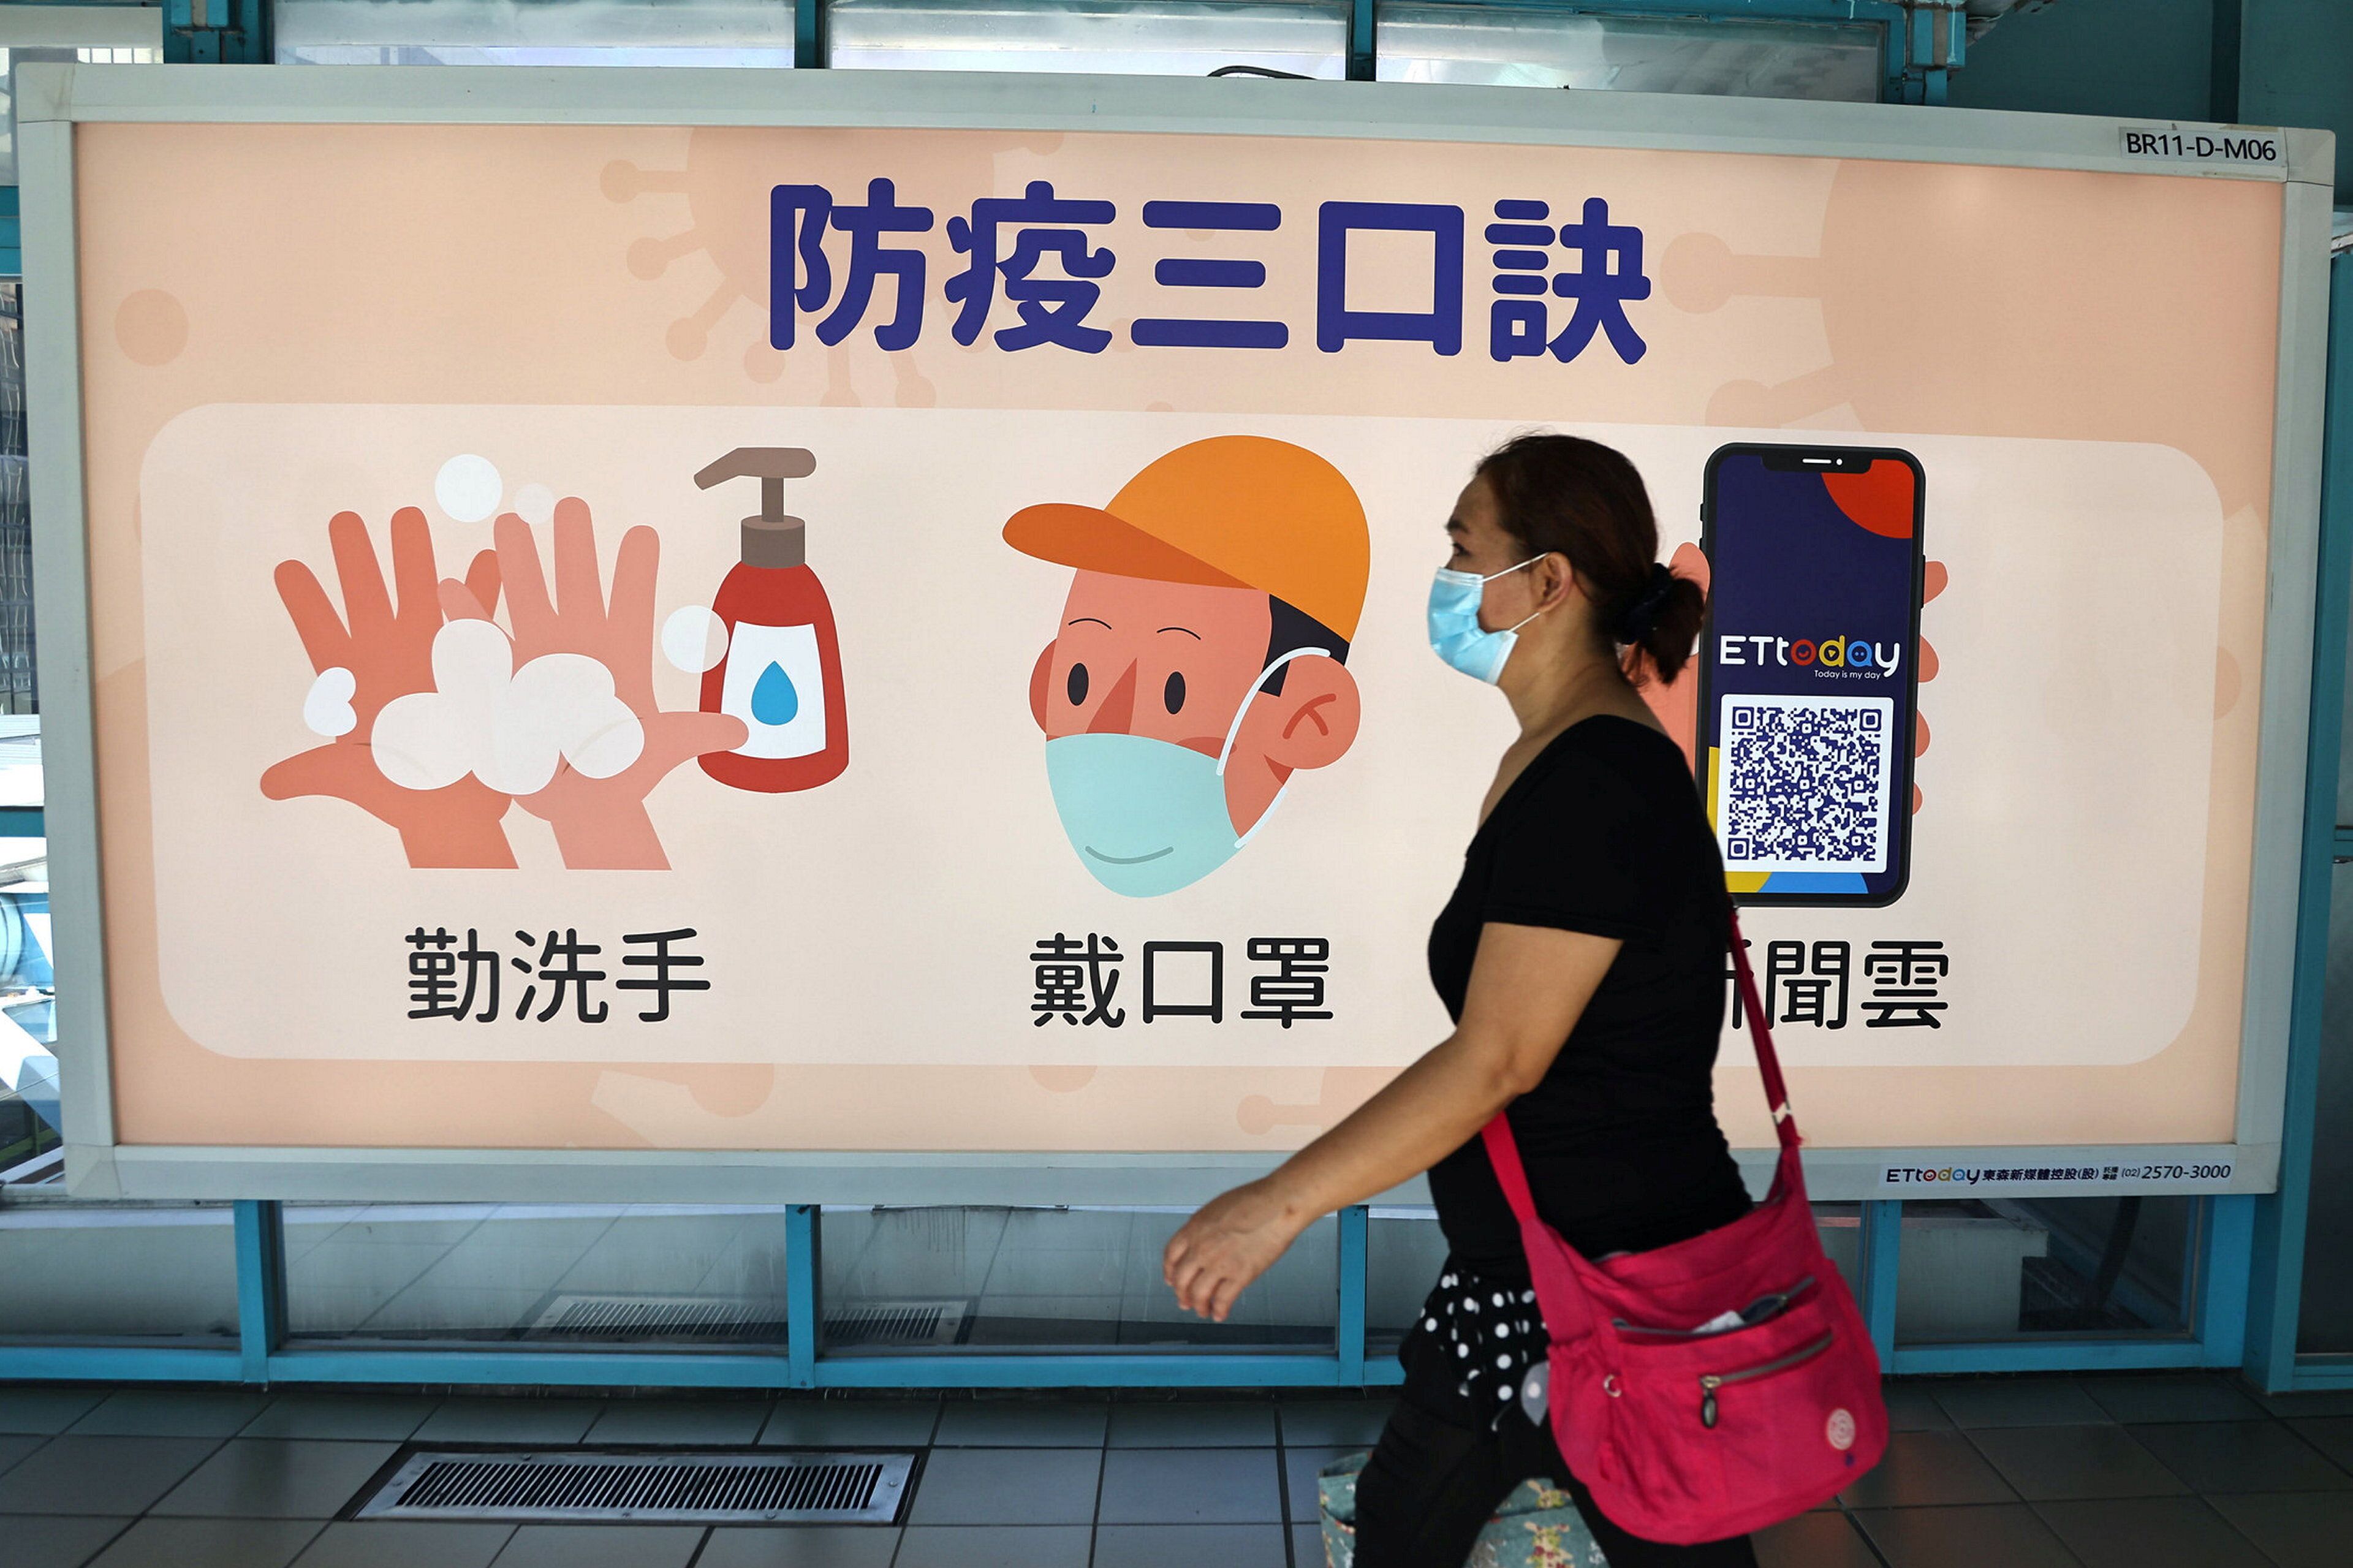 A woman wears a face mask at a metro station in Taipei, Taiwan, Nov. 18, 2020.